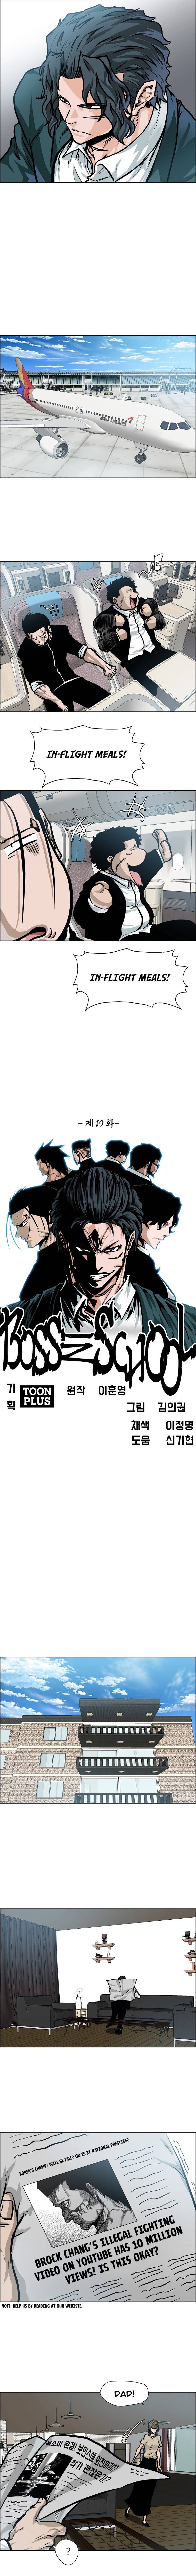 Boss in School Chapter 138 page 6